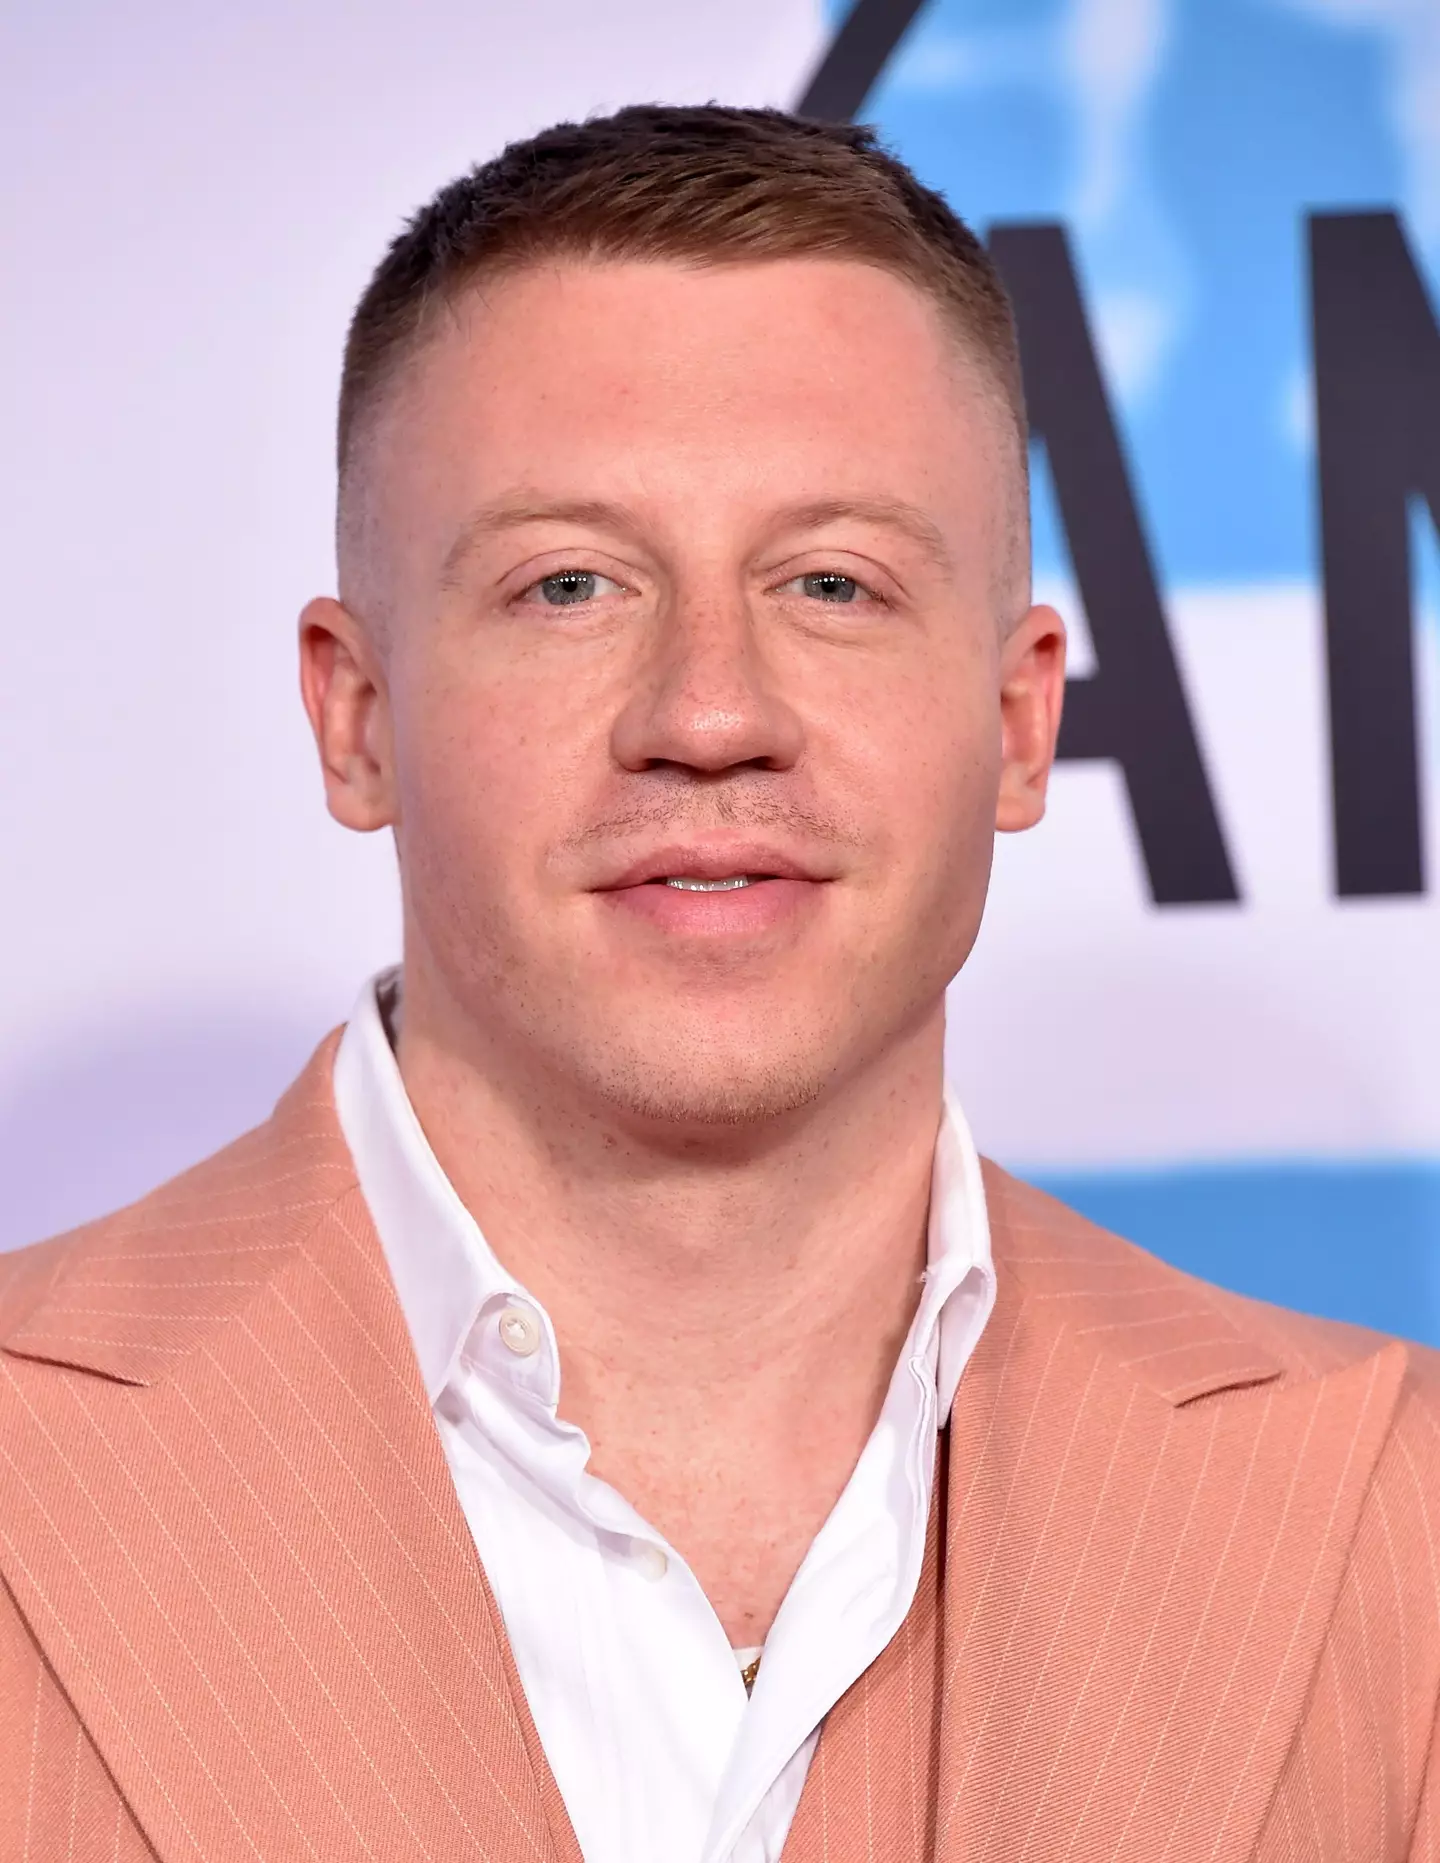 Macklemore has spoken frankly about his addictions.